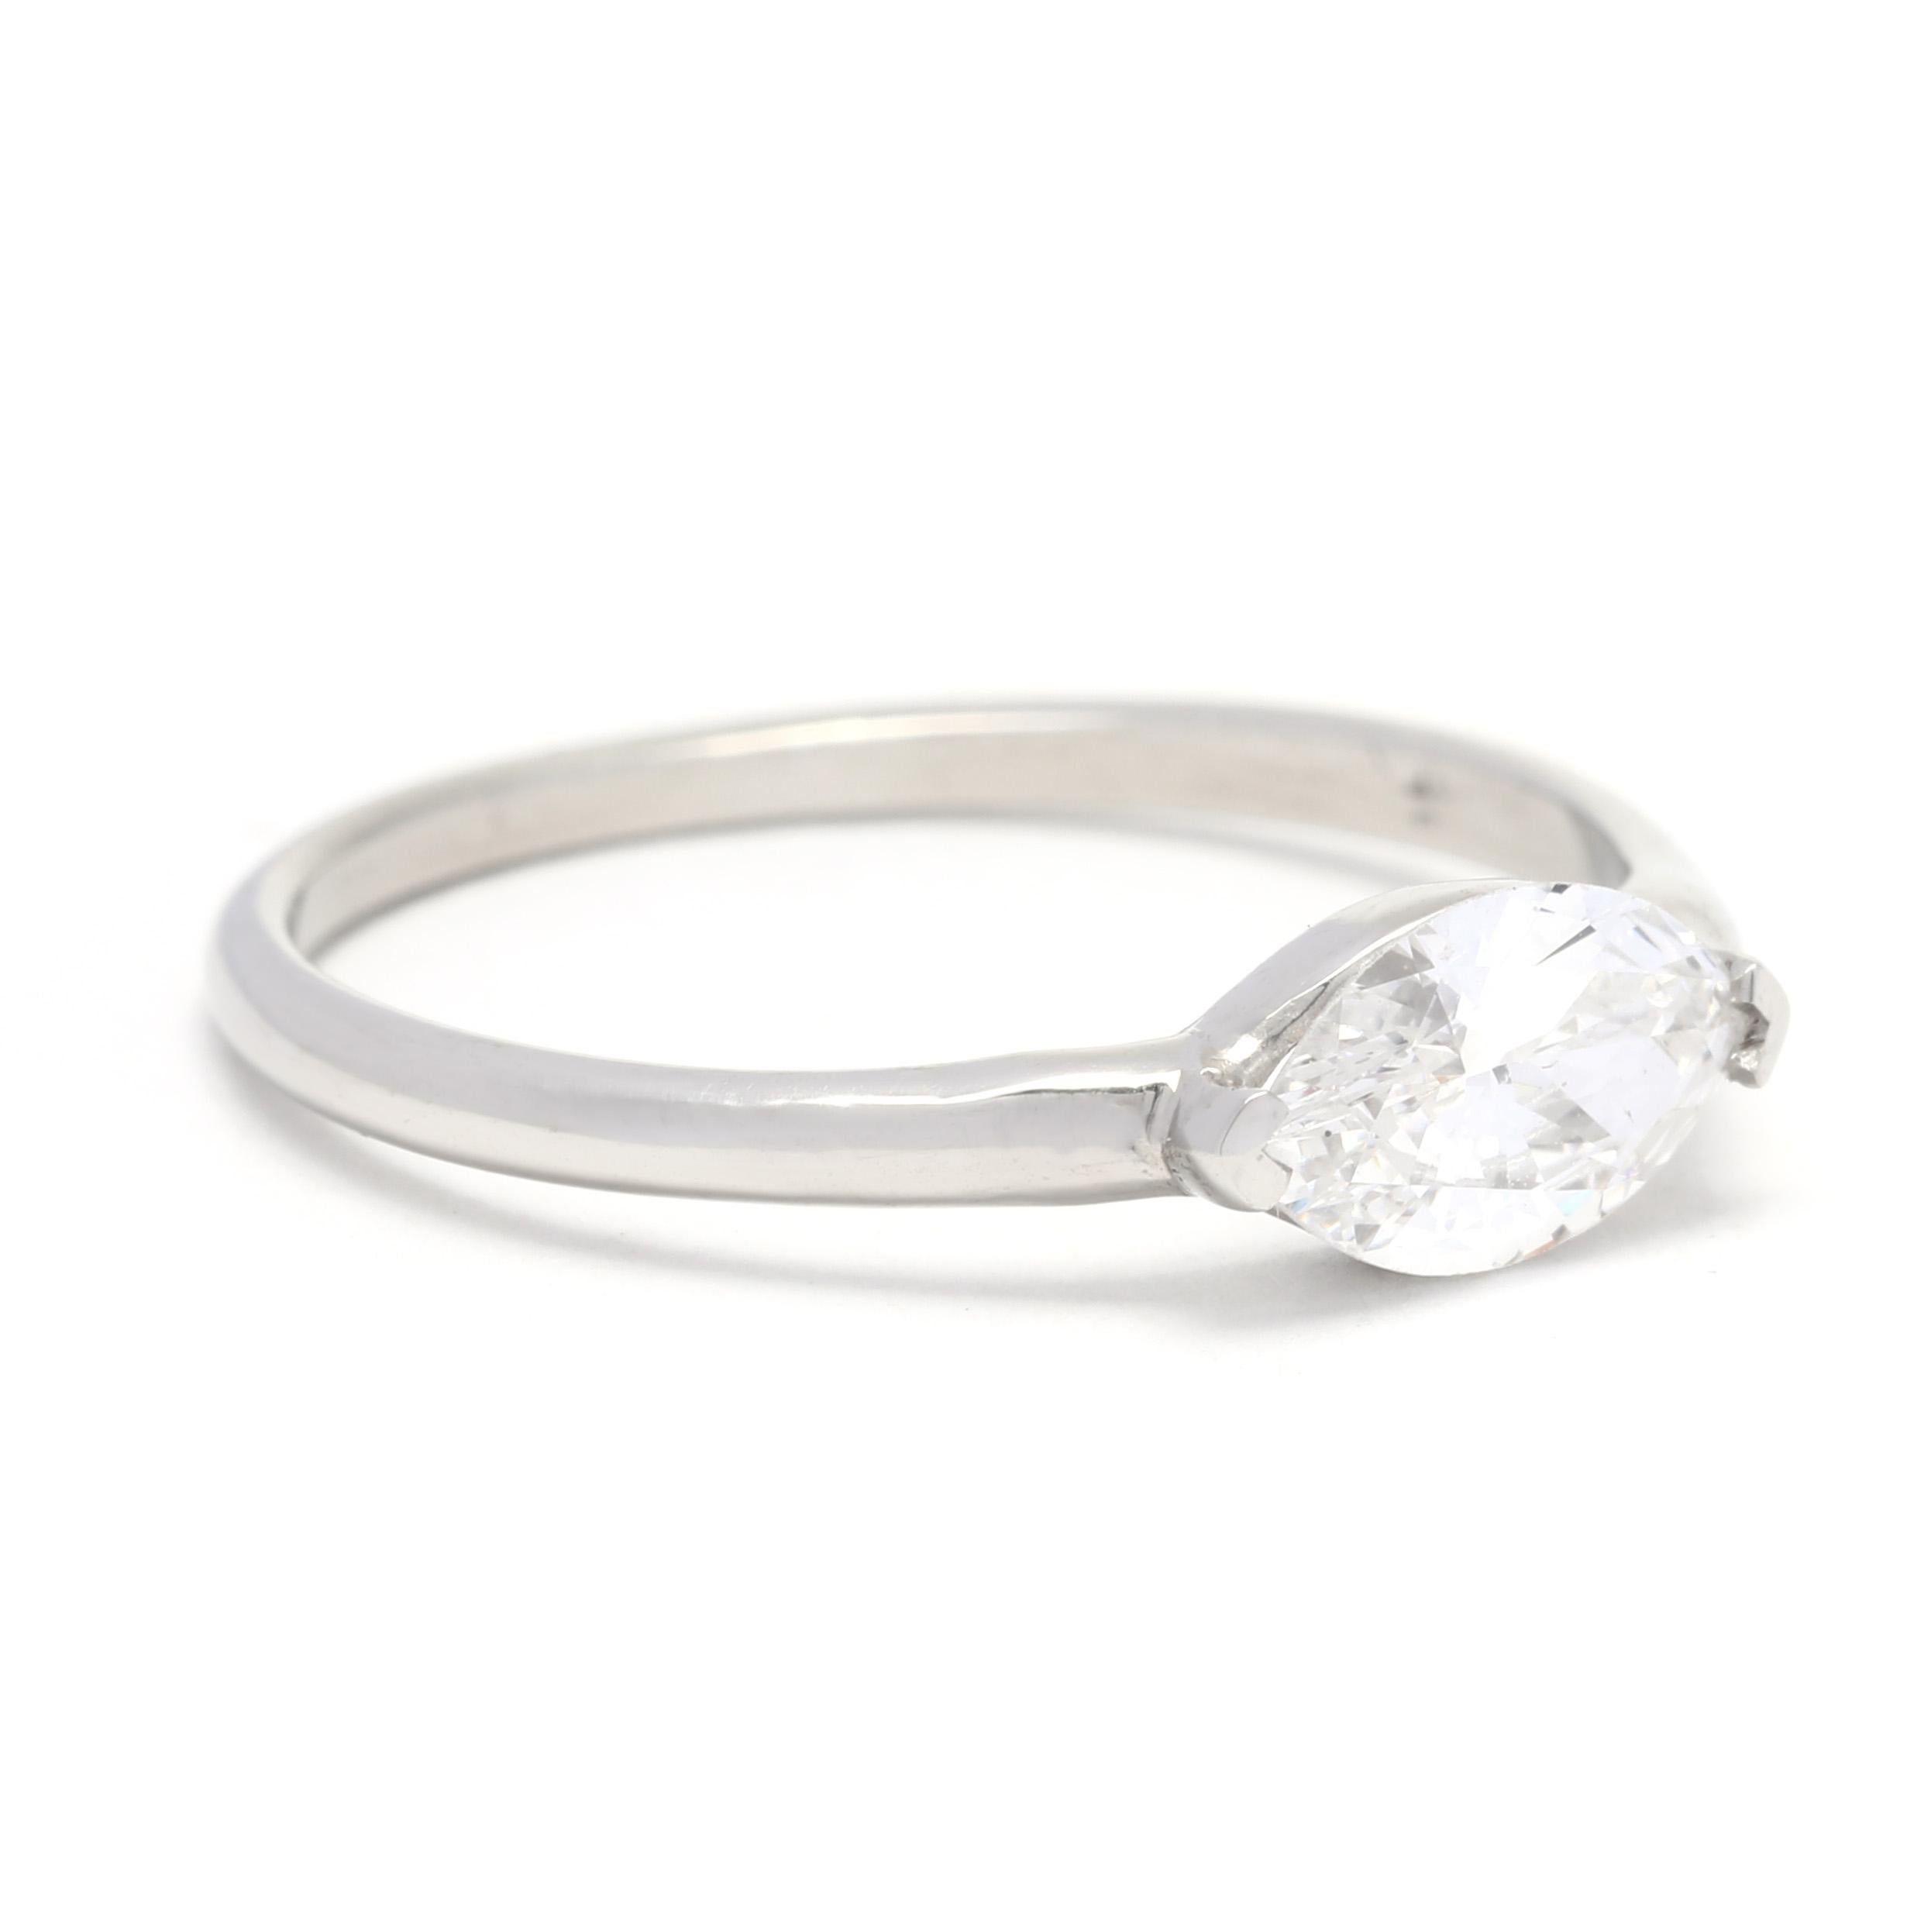 This timeless GIA certified .57ct horizontal marquise diamond engagement ring is made from luxurious platinum. Set in a marquise solitaire, this ring is the embodiment of elegance and style. This beautiful GIA certified .57ct horizontal marquise